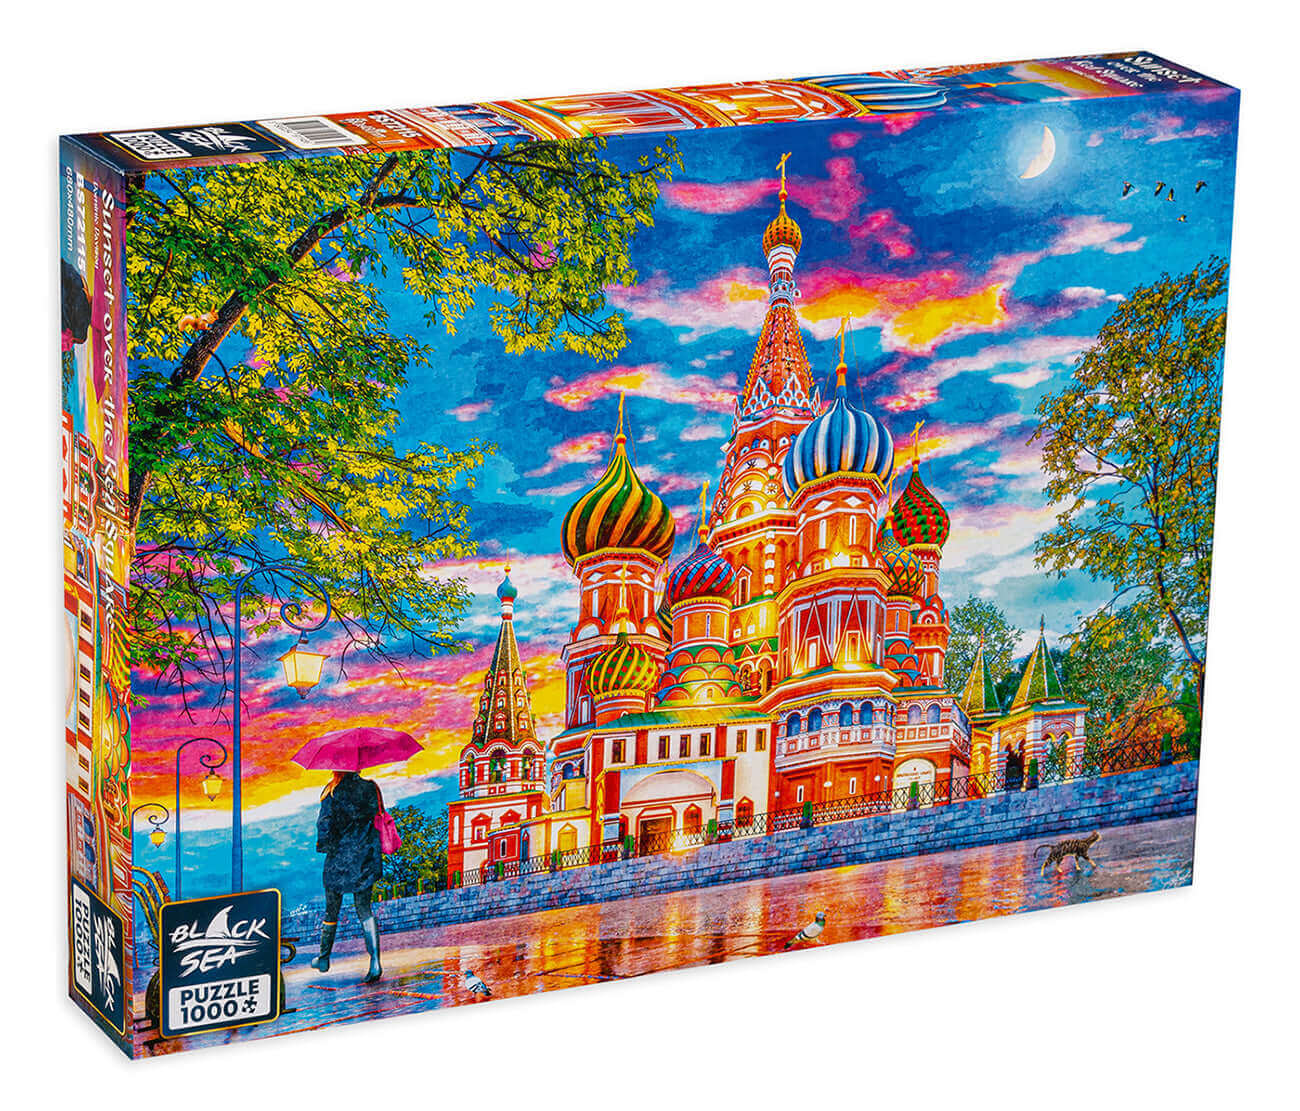 Puzzle Black Sea 1000 pieces - Sunset over the Red Square, The setting of the sun turns the Red Square into a fairytale. The unique colours come together to create a melody of lovely details, a harmony of elegant objects that turns one of Moscow’s landmar